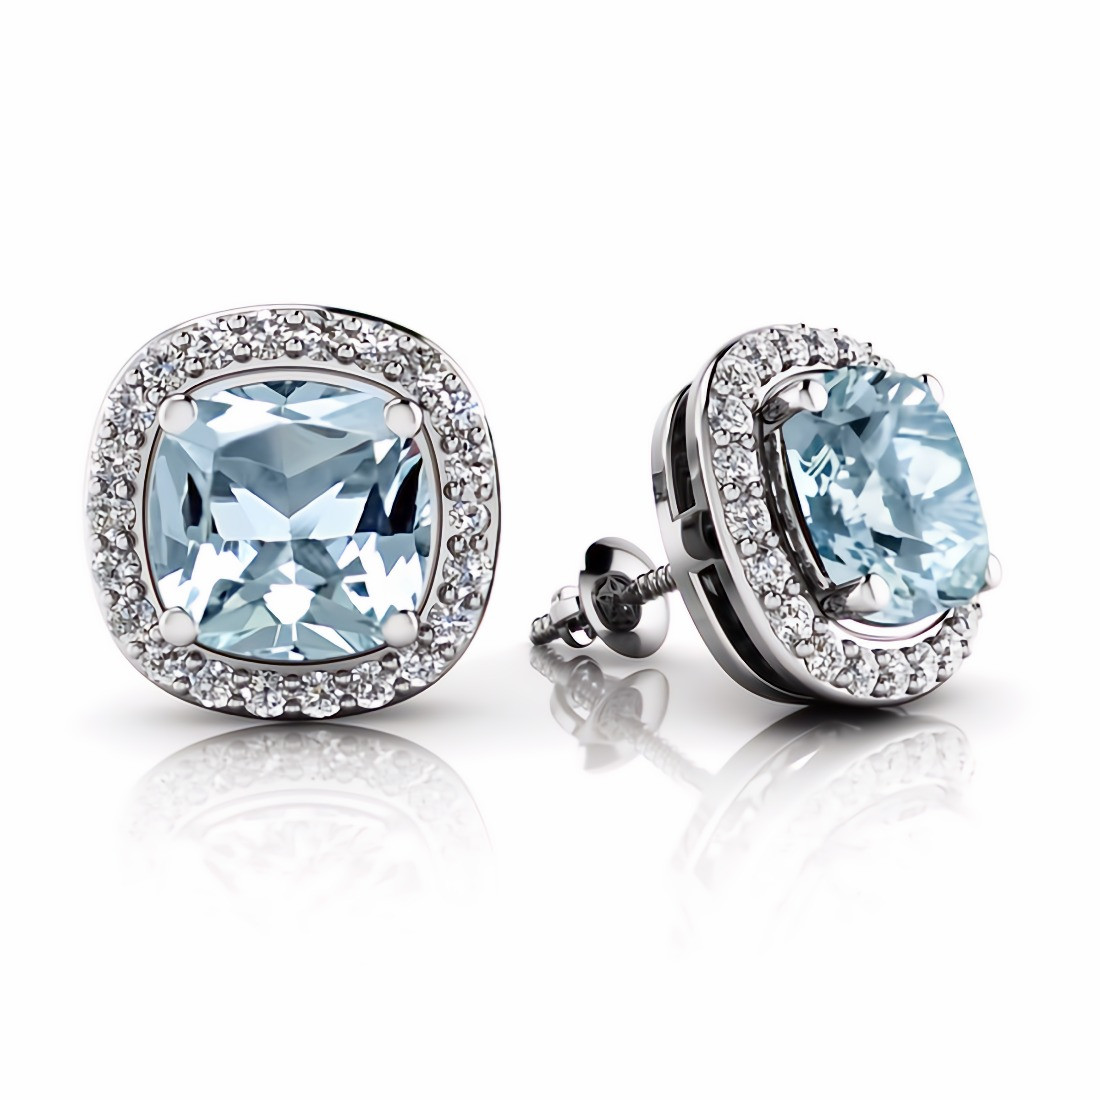 Aquamarine & Diamond Earrings — Your Most Trusted Brand for Fine Jewelry &  Custom Design in Yardley, PA